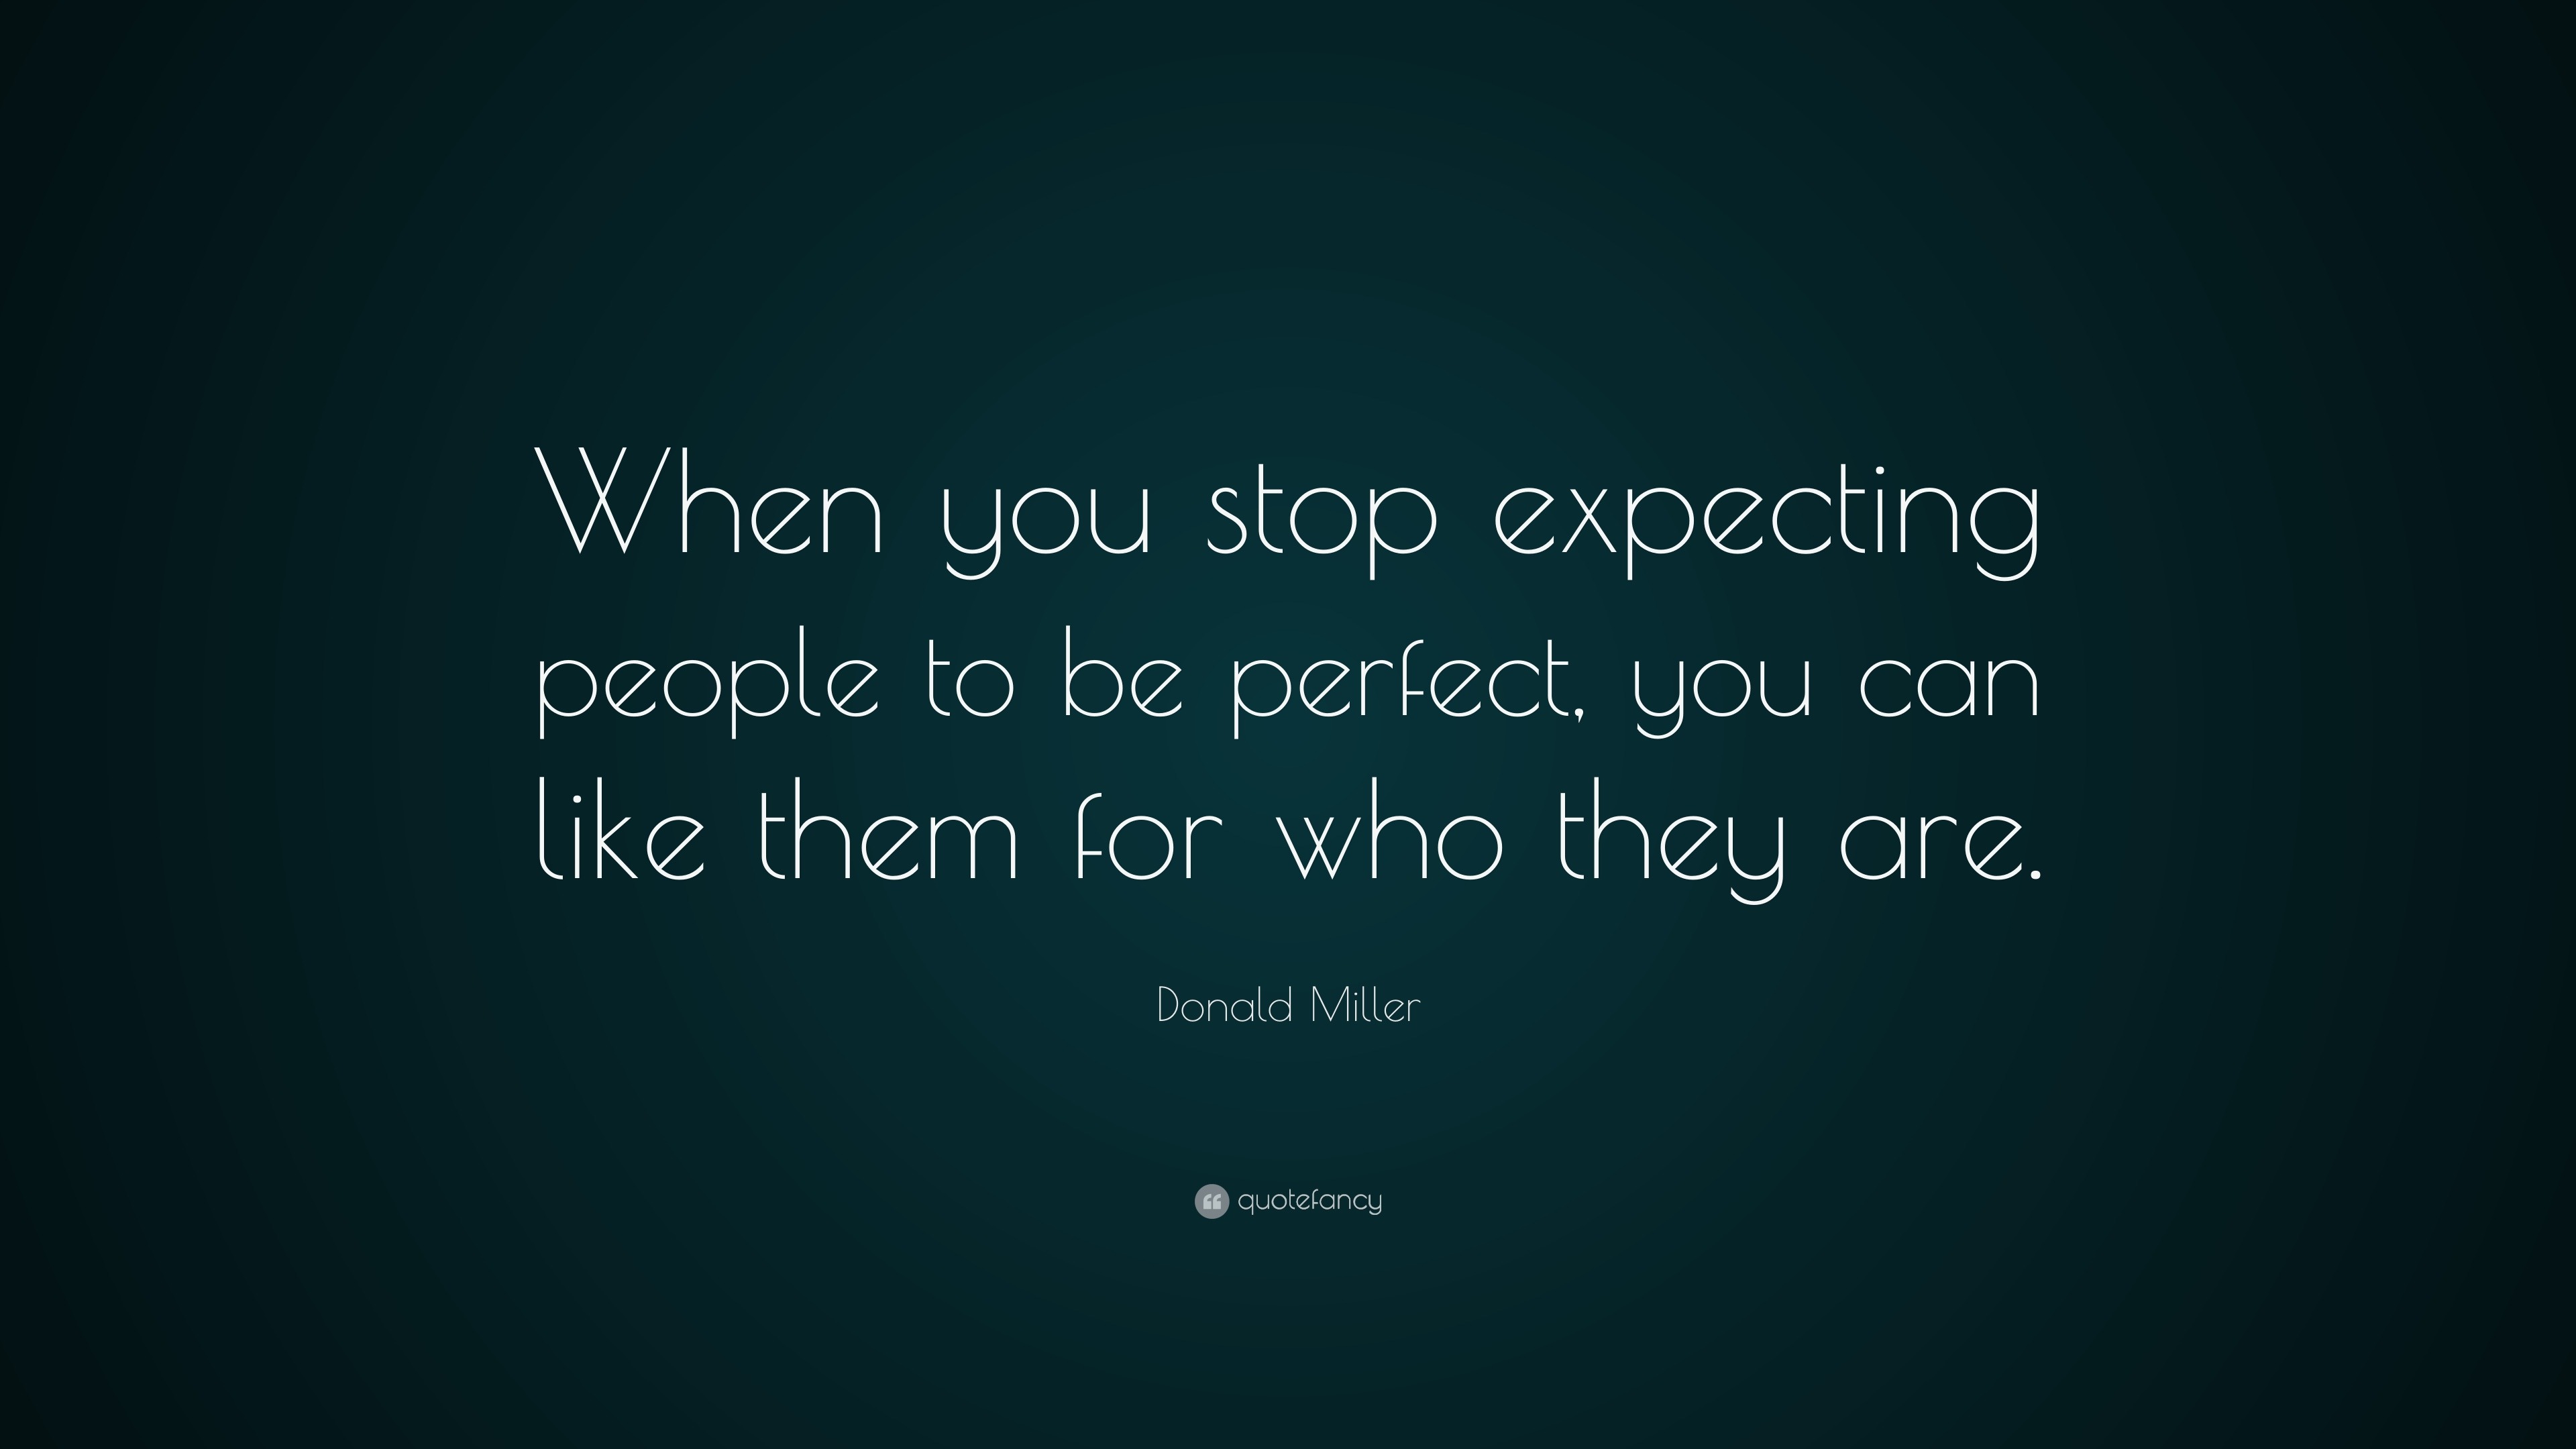 Donald Miller Quote: “When you stop expecting people to be perfect, you can  like them for